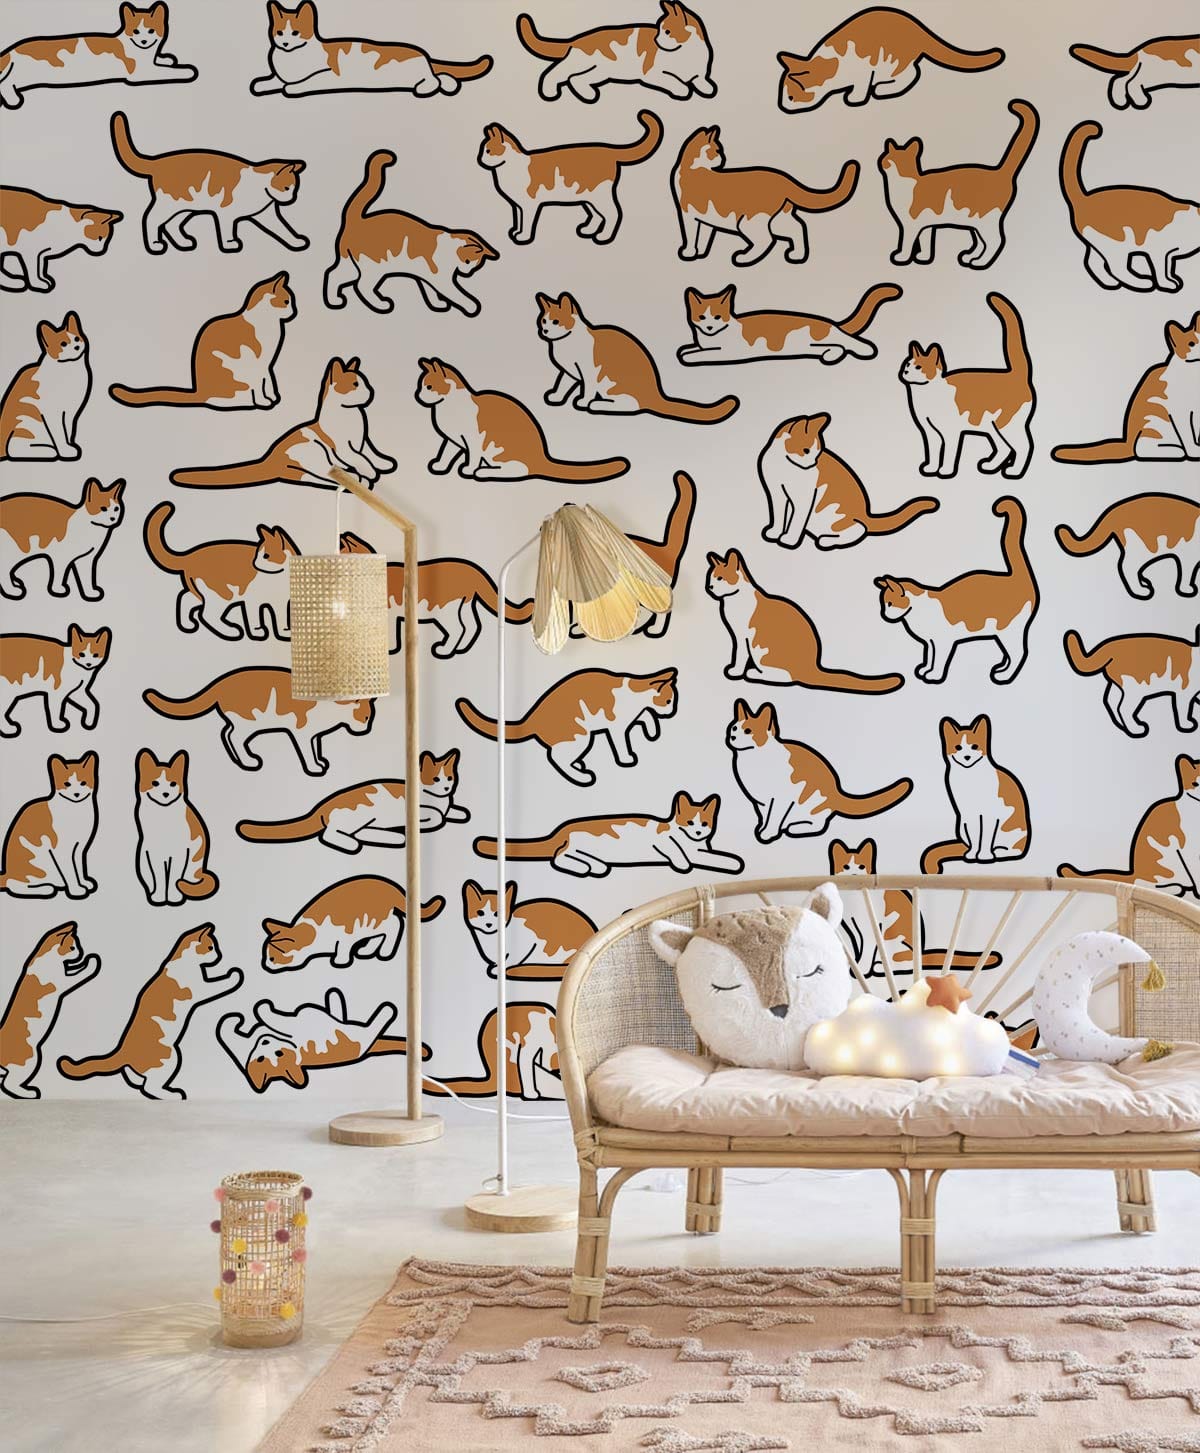 Cat Pose Collection Wallpaper Mural